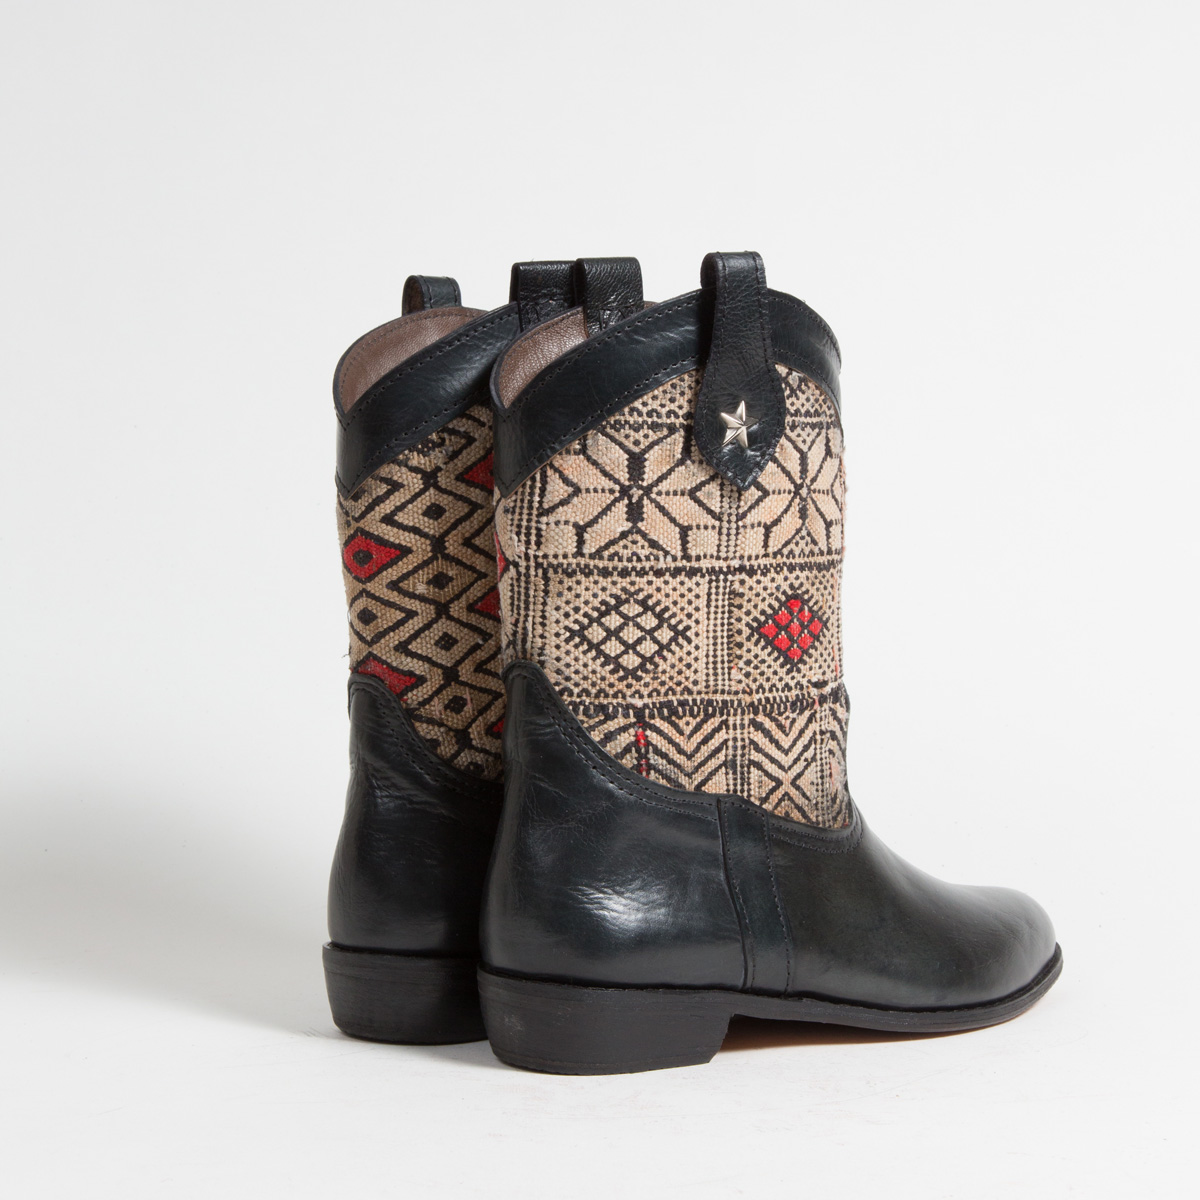 Bottines Kilim cuir mababouche artisanales (Réf. MN11-40)